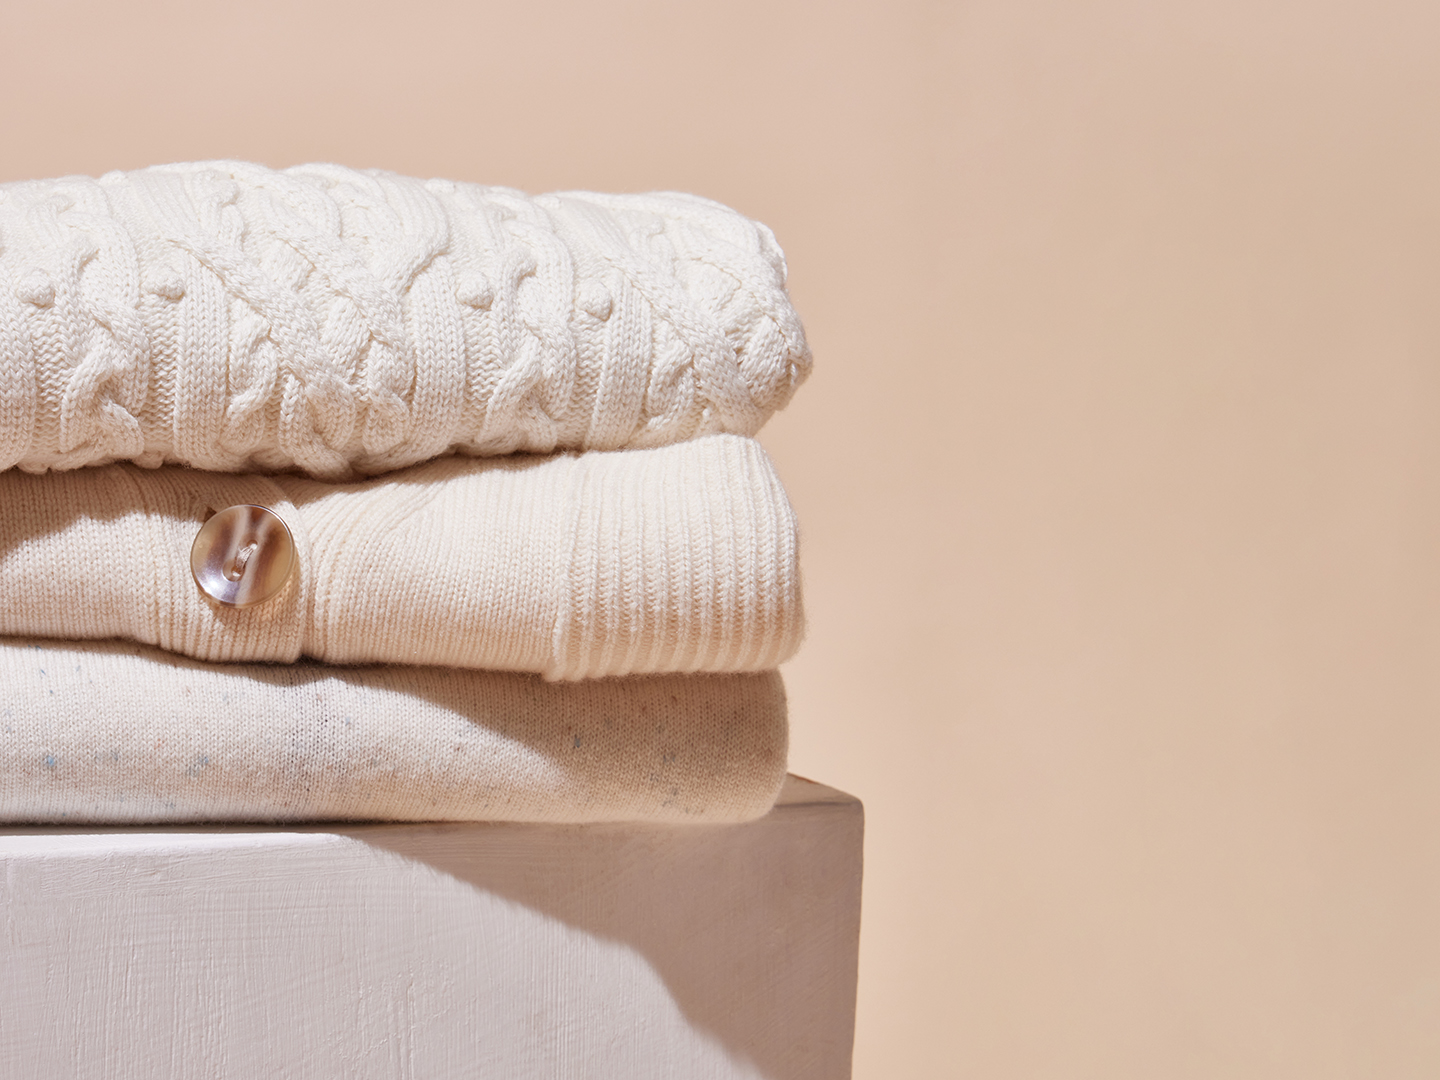 How to care for your knitwear - desktop